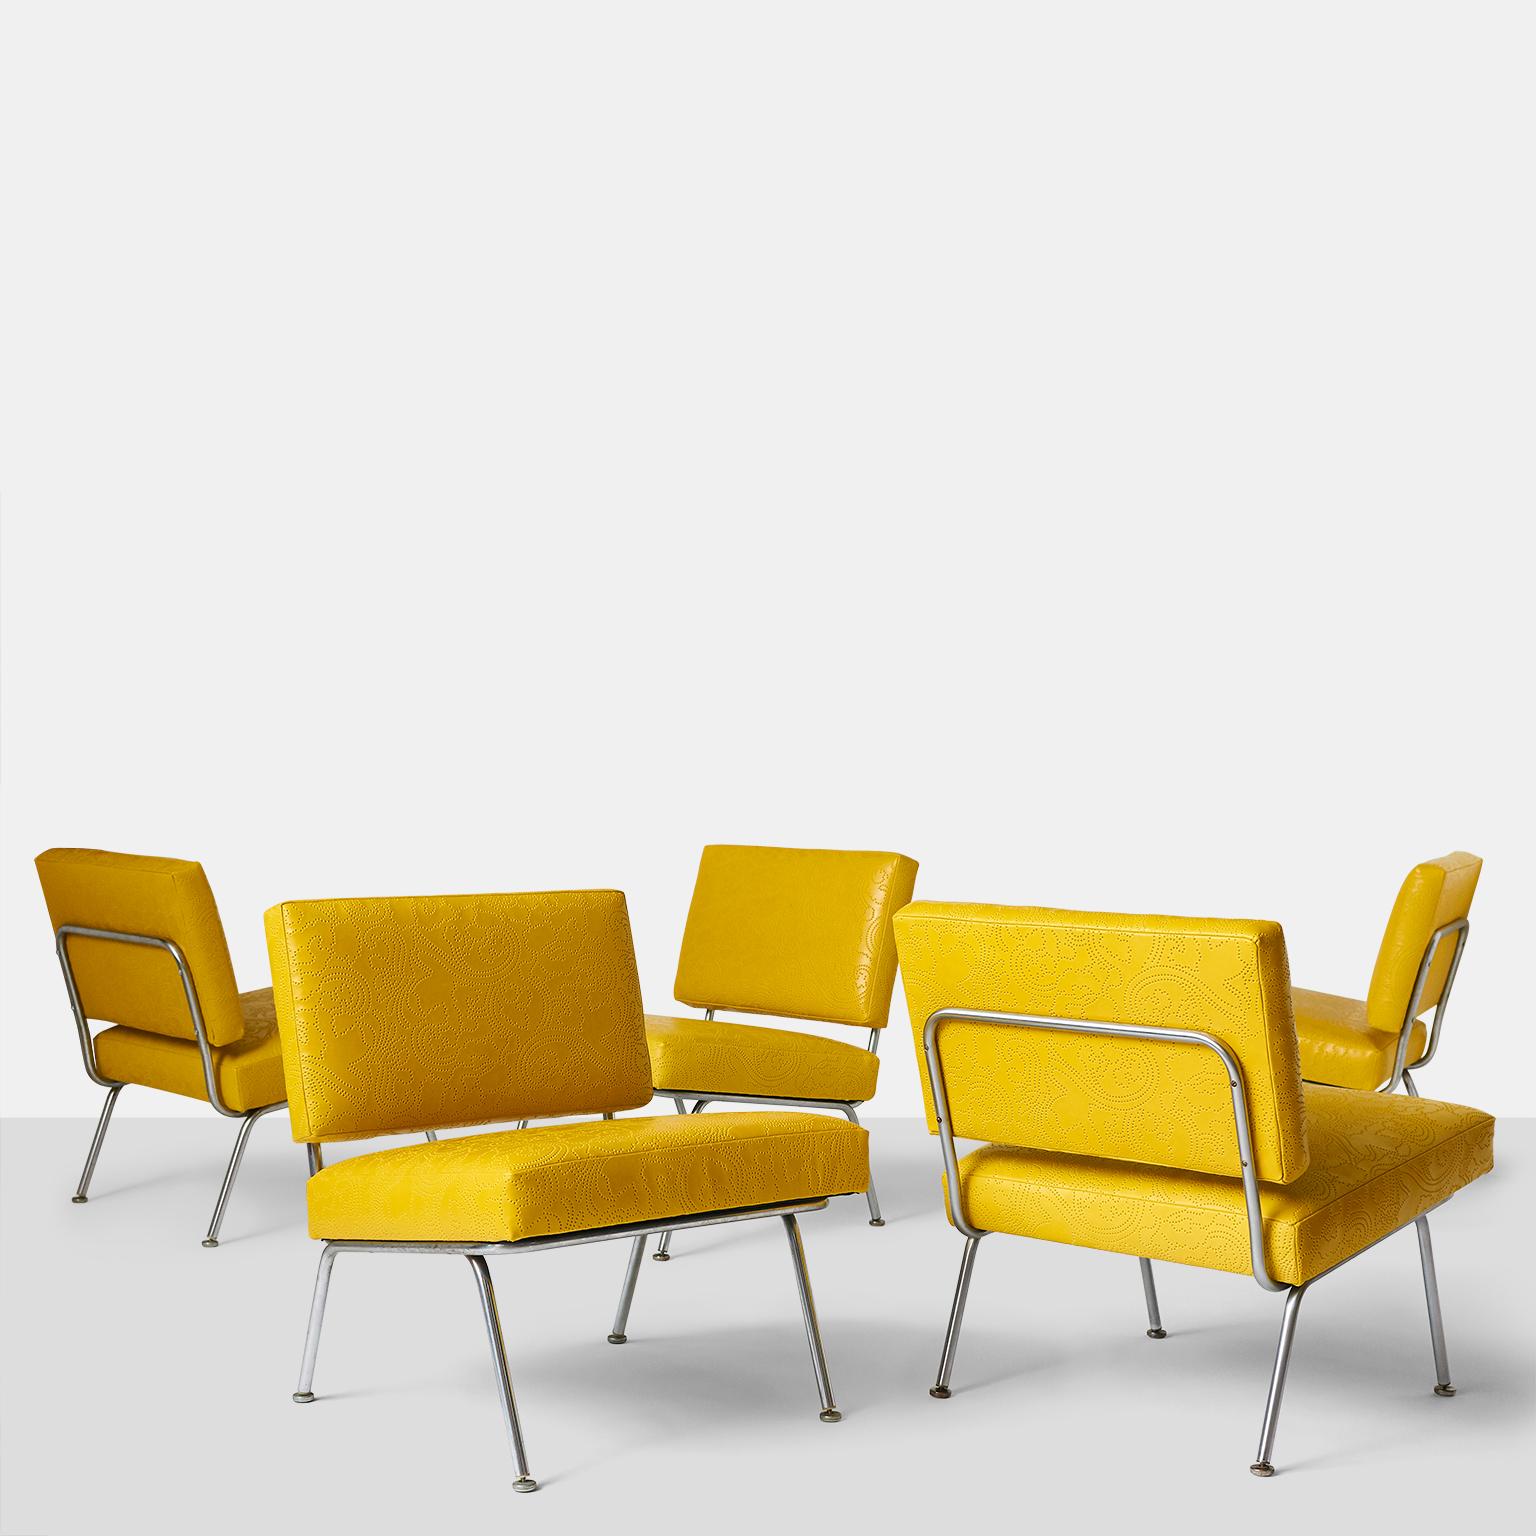 Set of Five Florence Knoll chairs model #31 for Knoll International.
A very rare and early set of 5 chairs by Florence Knoll in a satin steel finish with the original glides on all legs. Completely restored in a luxurious perforated leather by Jerry